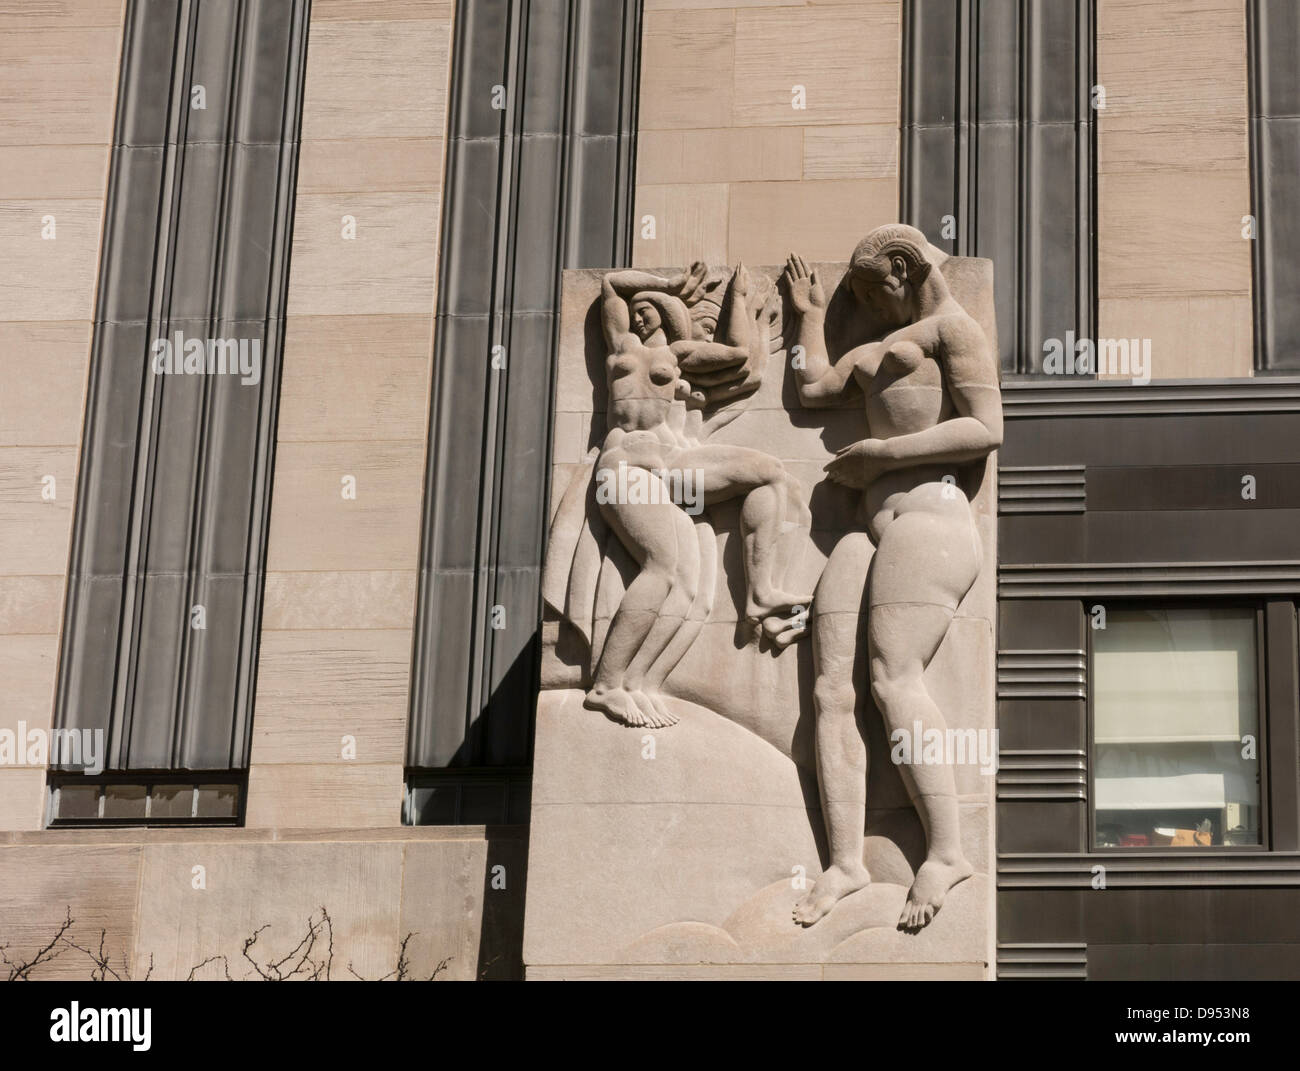 'Television' Limestone Carving in Rockefeller Center, NYC Stock Photo